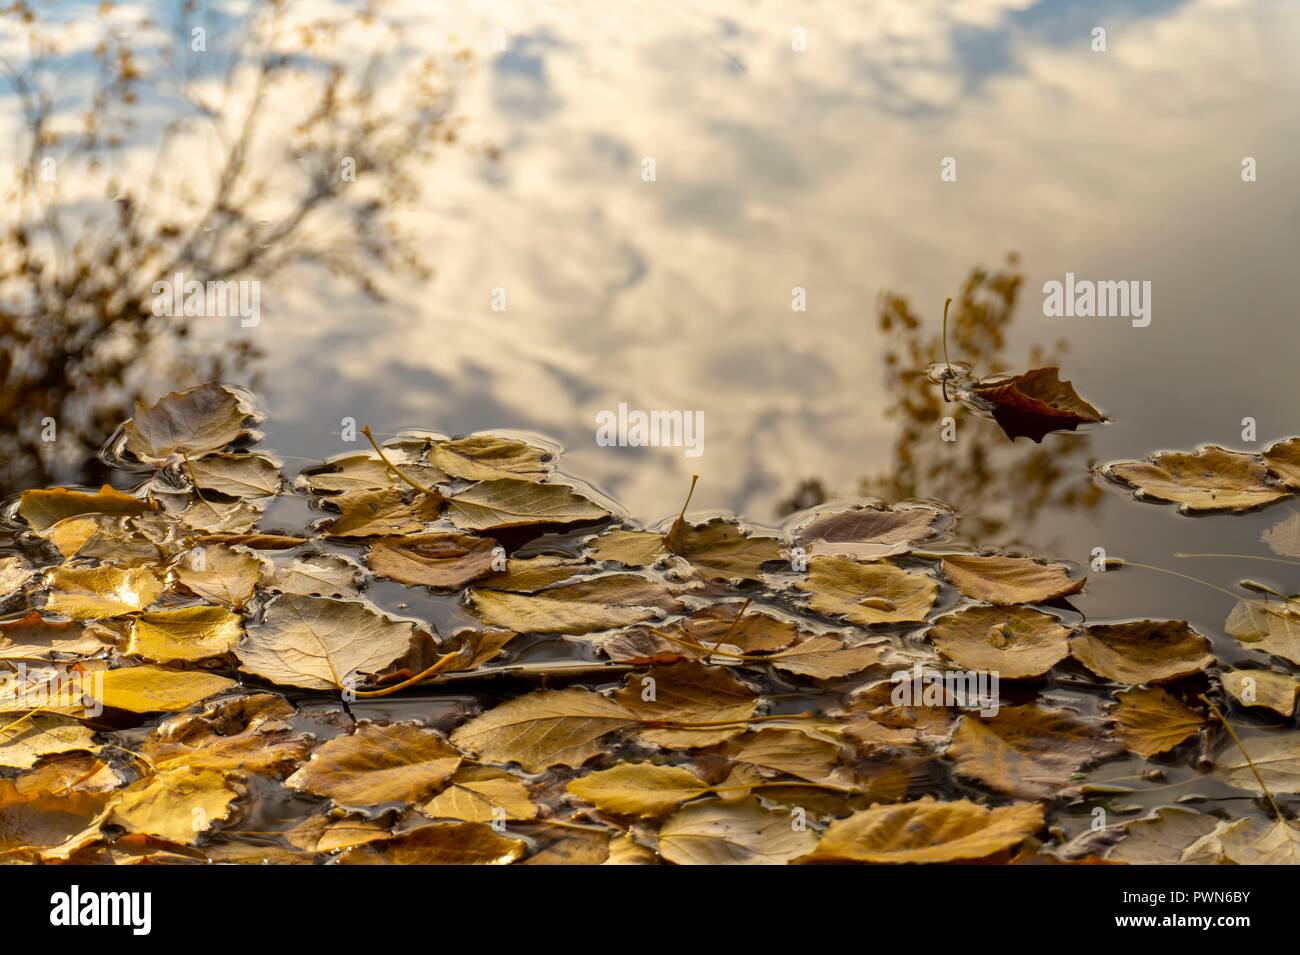 Colorful yellow autumn leaves floating on tranquil water with reflections of the sky, clouds and a tree in a concept of the changing seasons Stock Photo